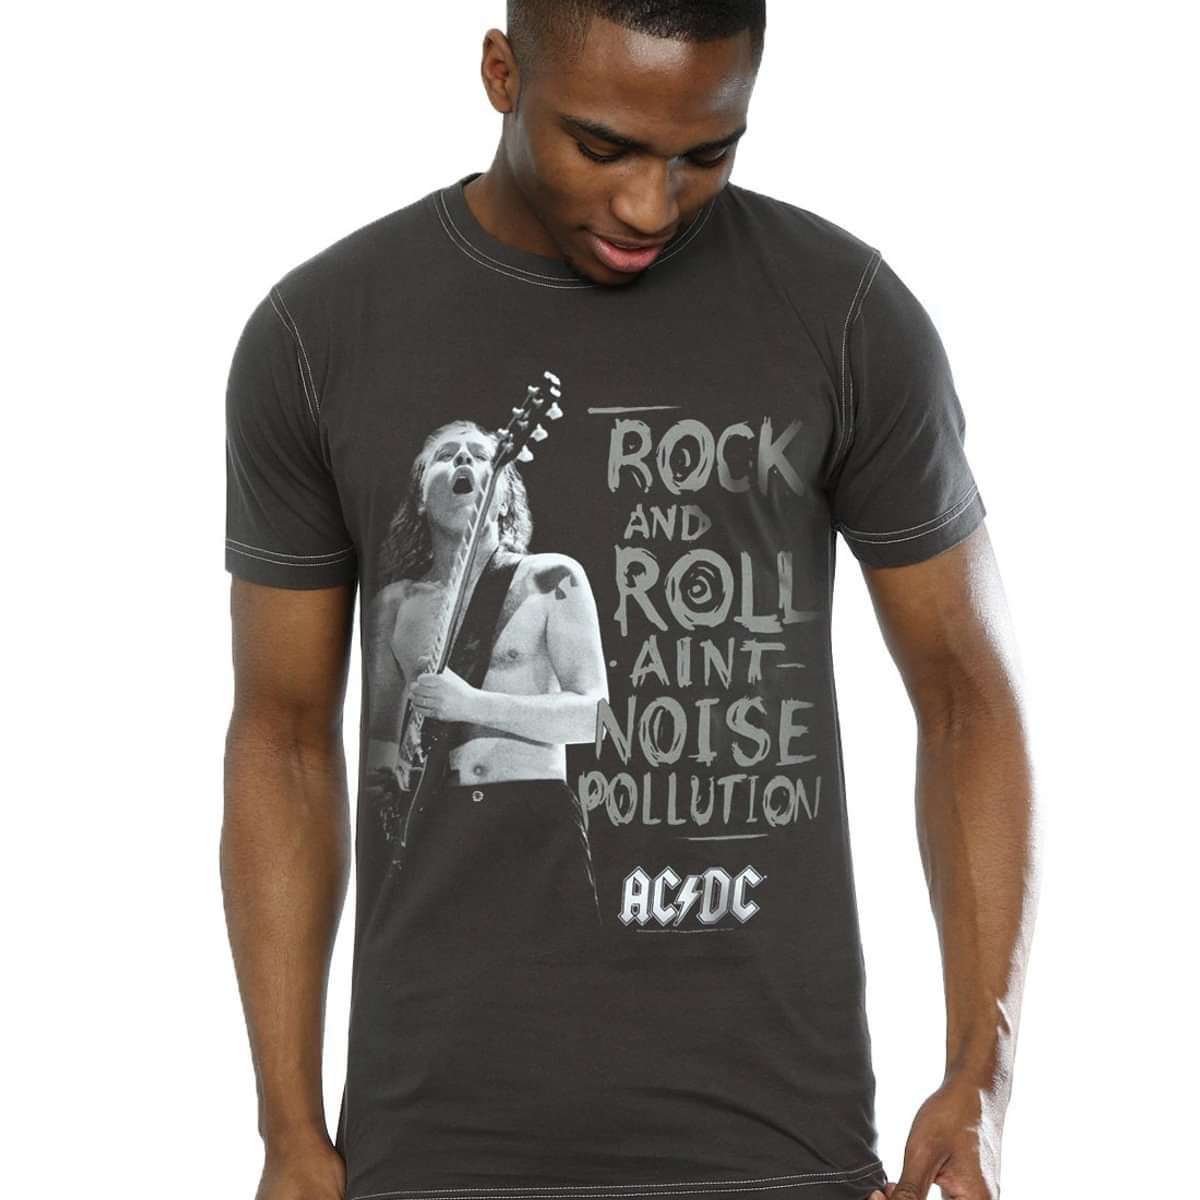 ACDC Noise Pollution T-Shirt - Aftershow